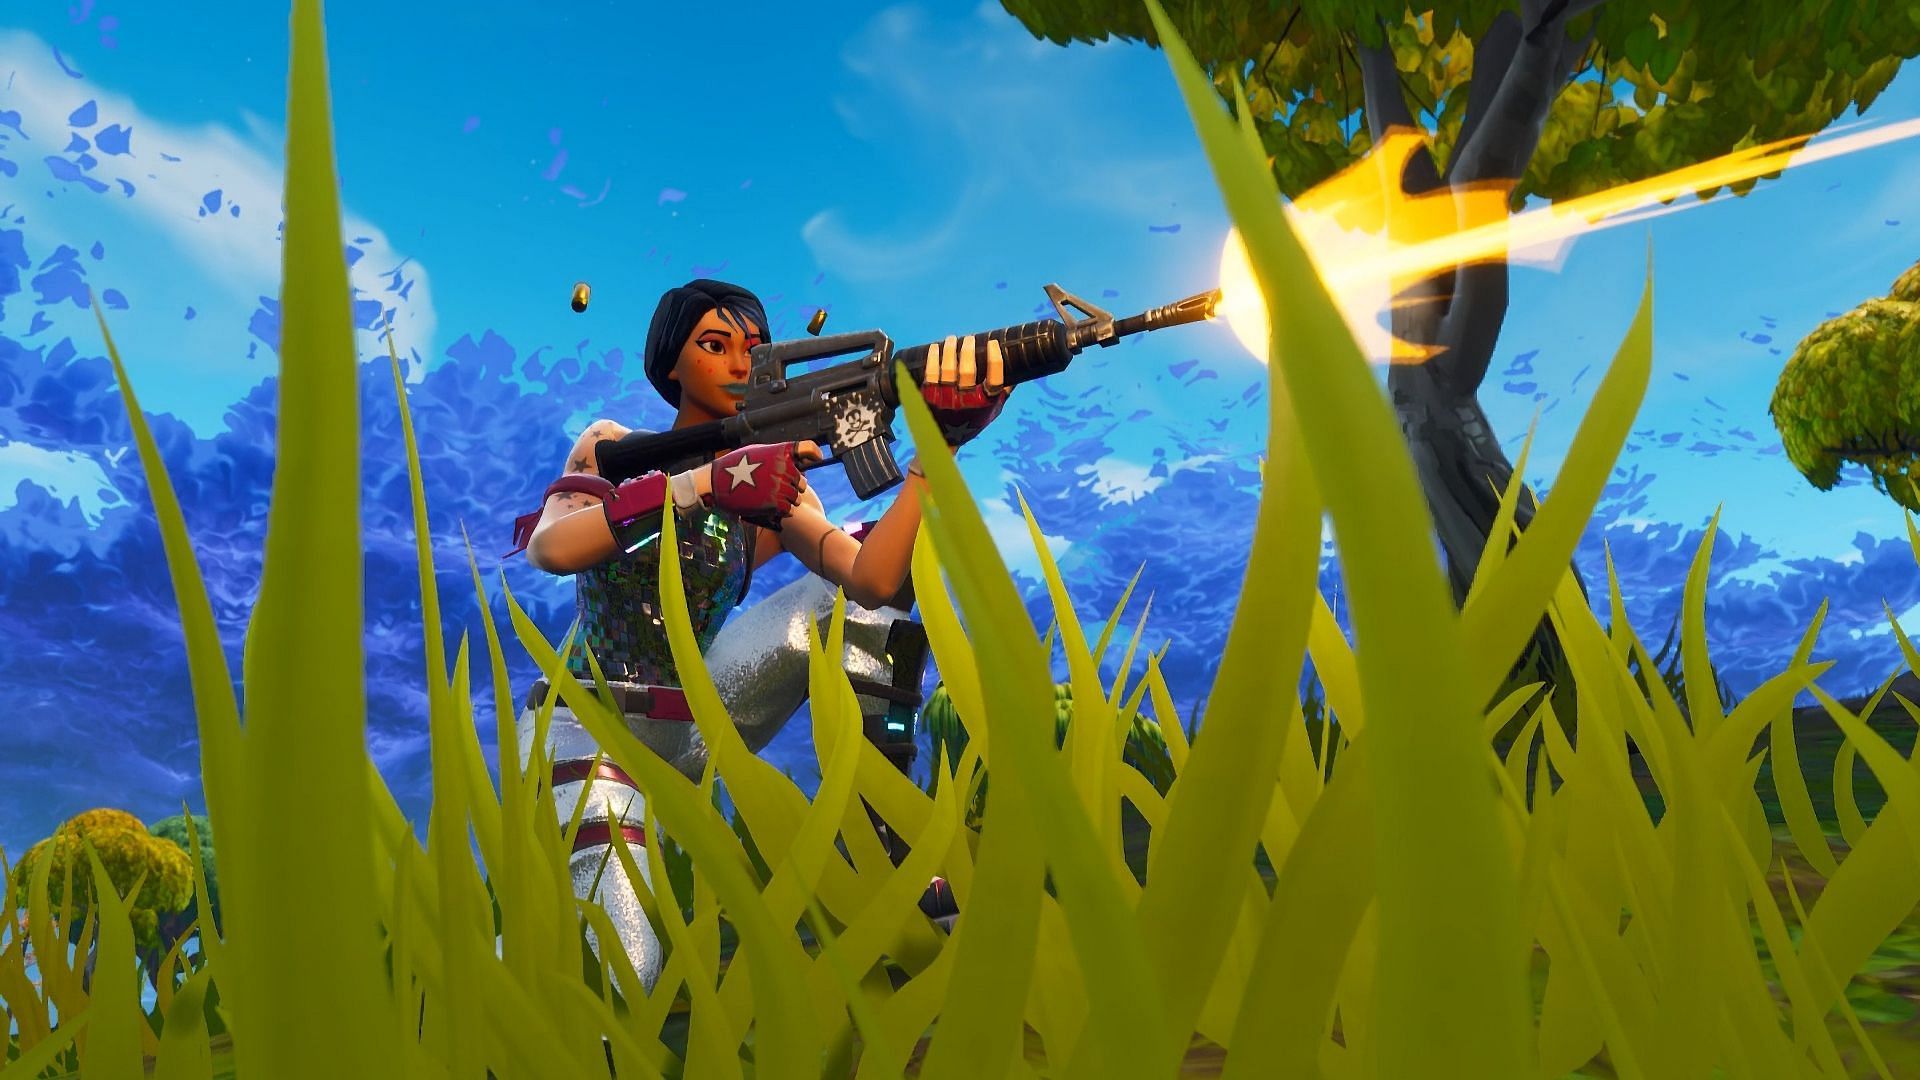 These Fortnite pros use stealth and win games thanks to it. (Image via Epic Games)